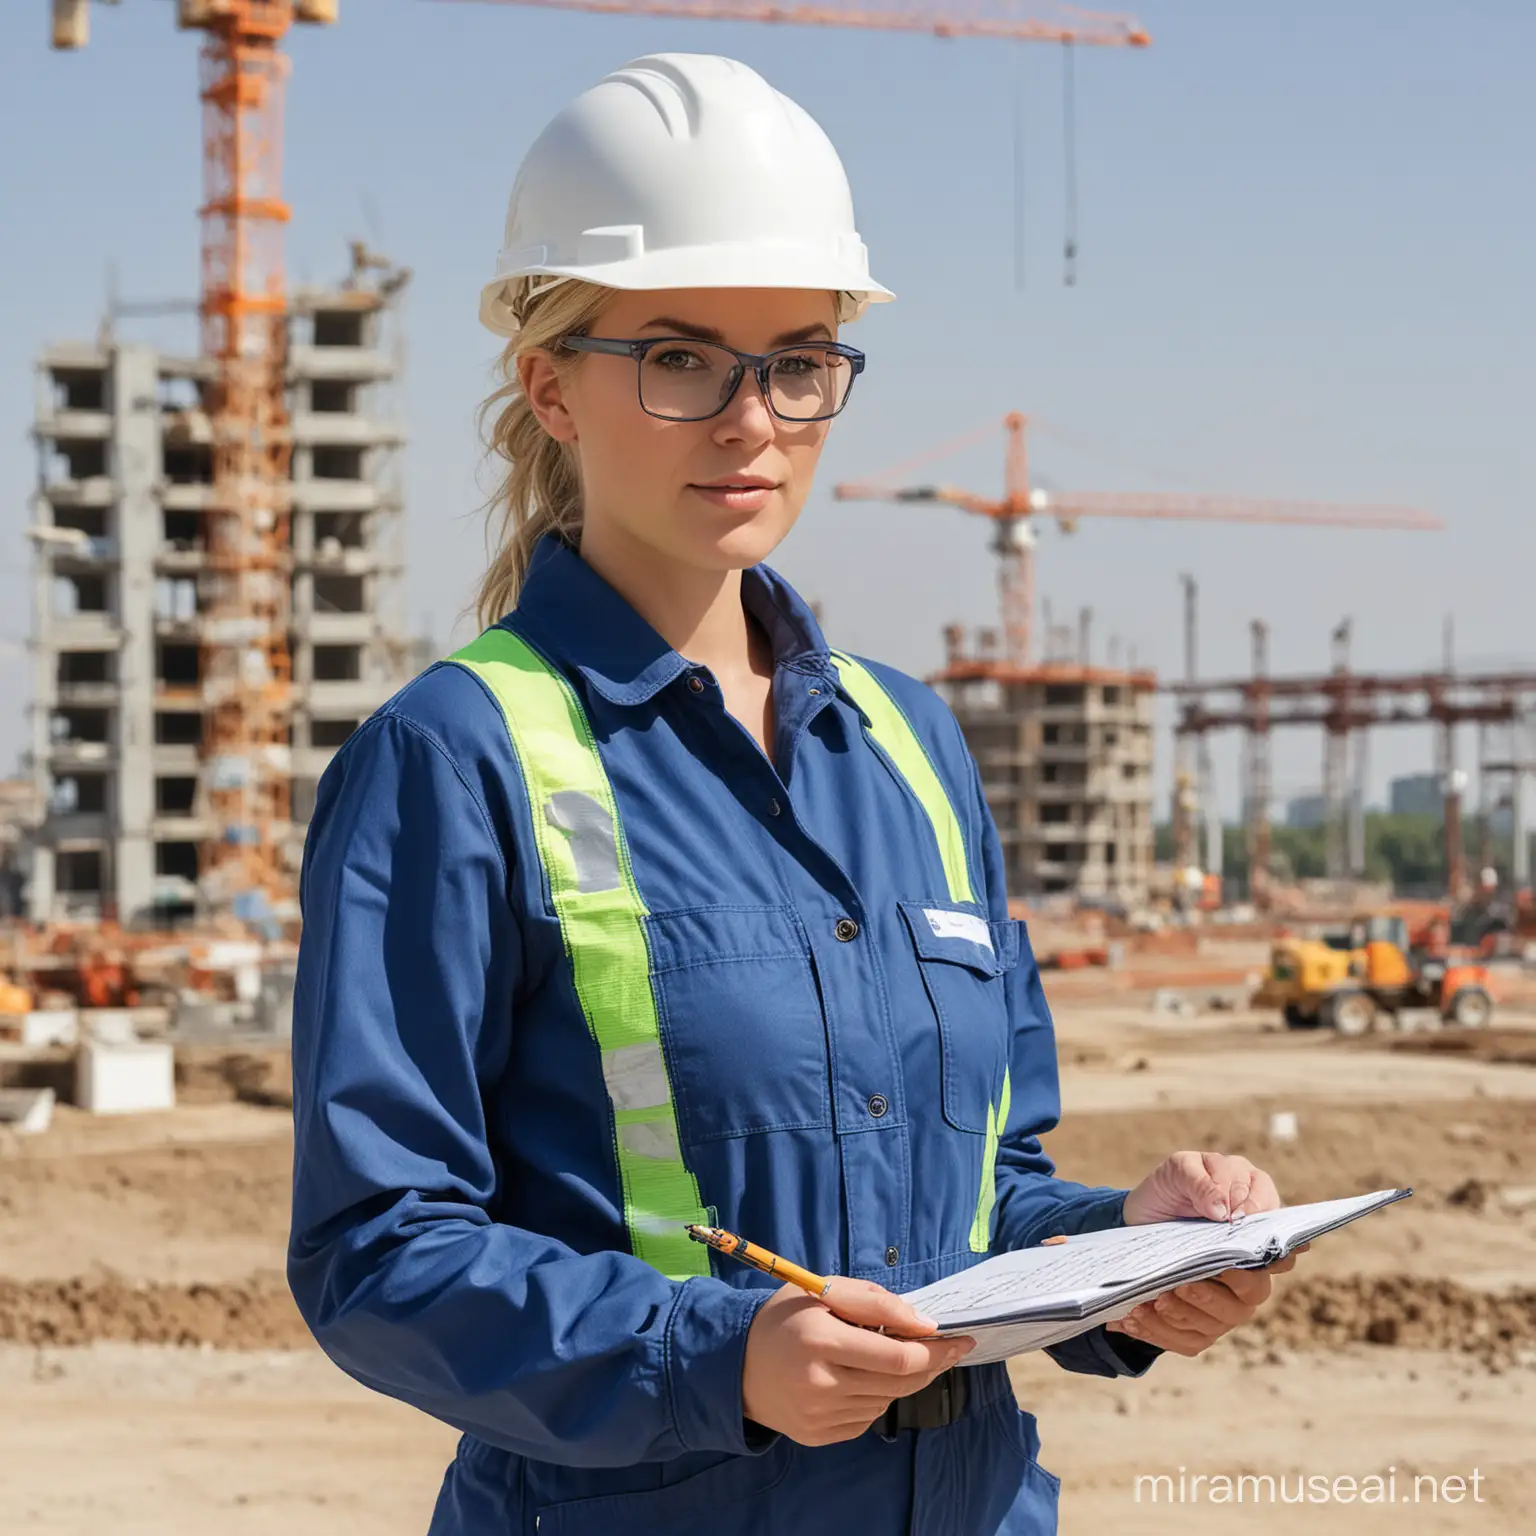 blonde white female construction worker on site wearing blue work coverall gear, white hard hat, safety glasses, taking notes, one crane on the background